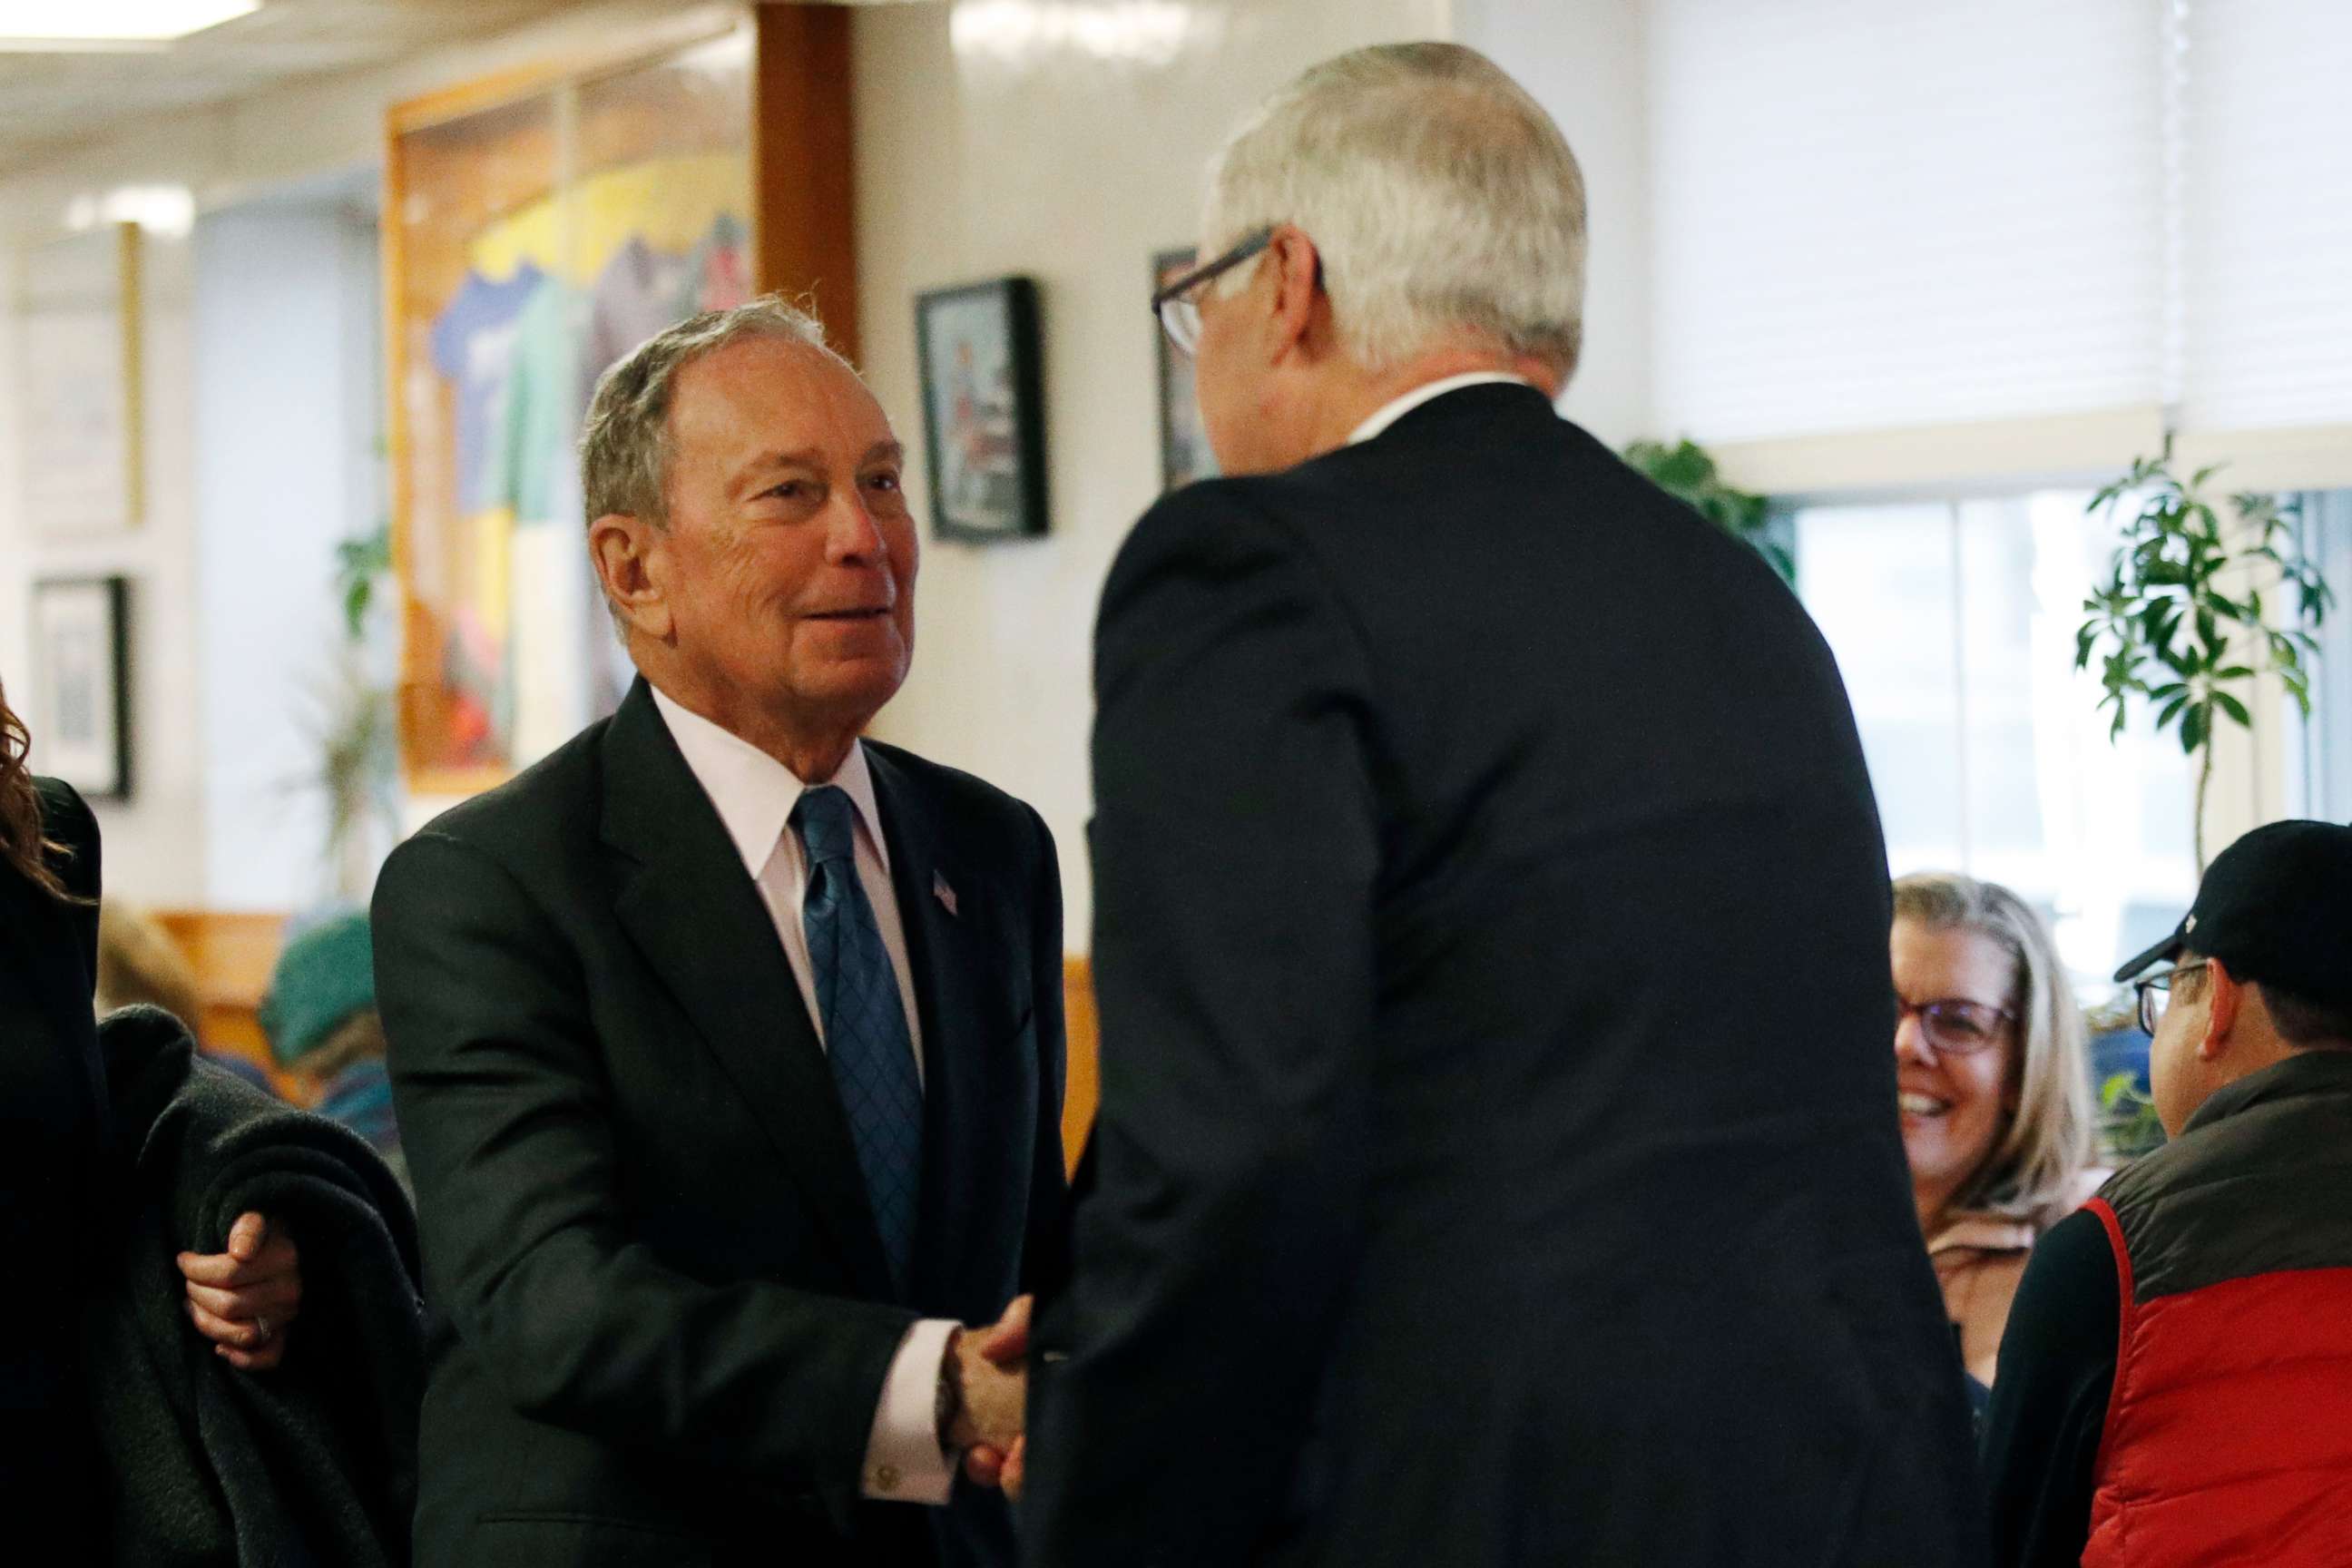 PHOTO: Democratic presidential candidate and former New York City Mayor Michael Bloomberg, left, is greeted by former U.S. Rep. Mike Michaud at Becky's Diner, Monday, Jan. 27, 2020, in Portland, Maine.